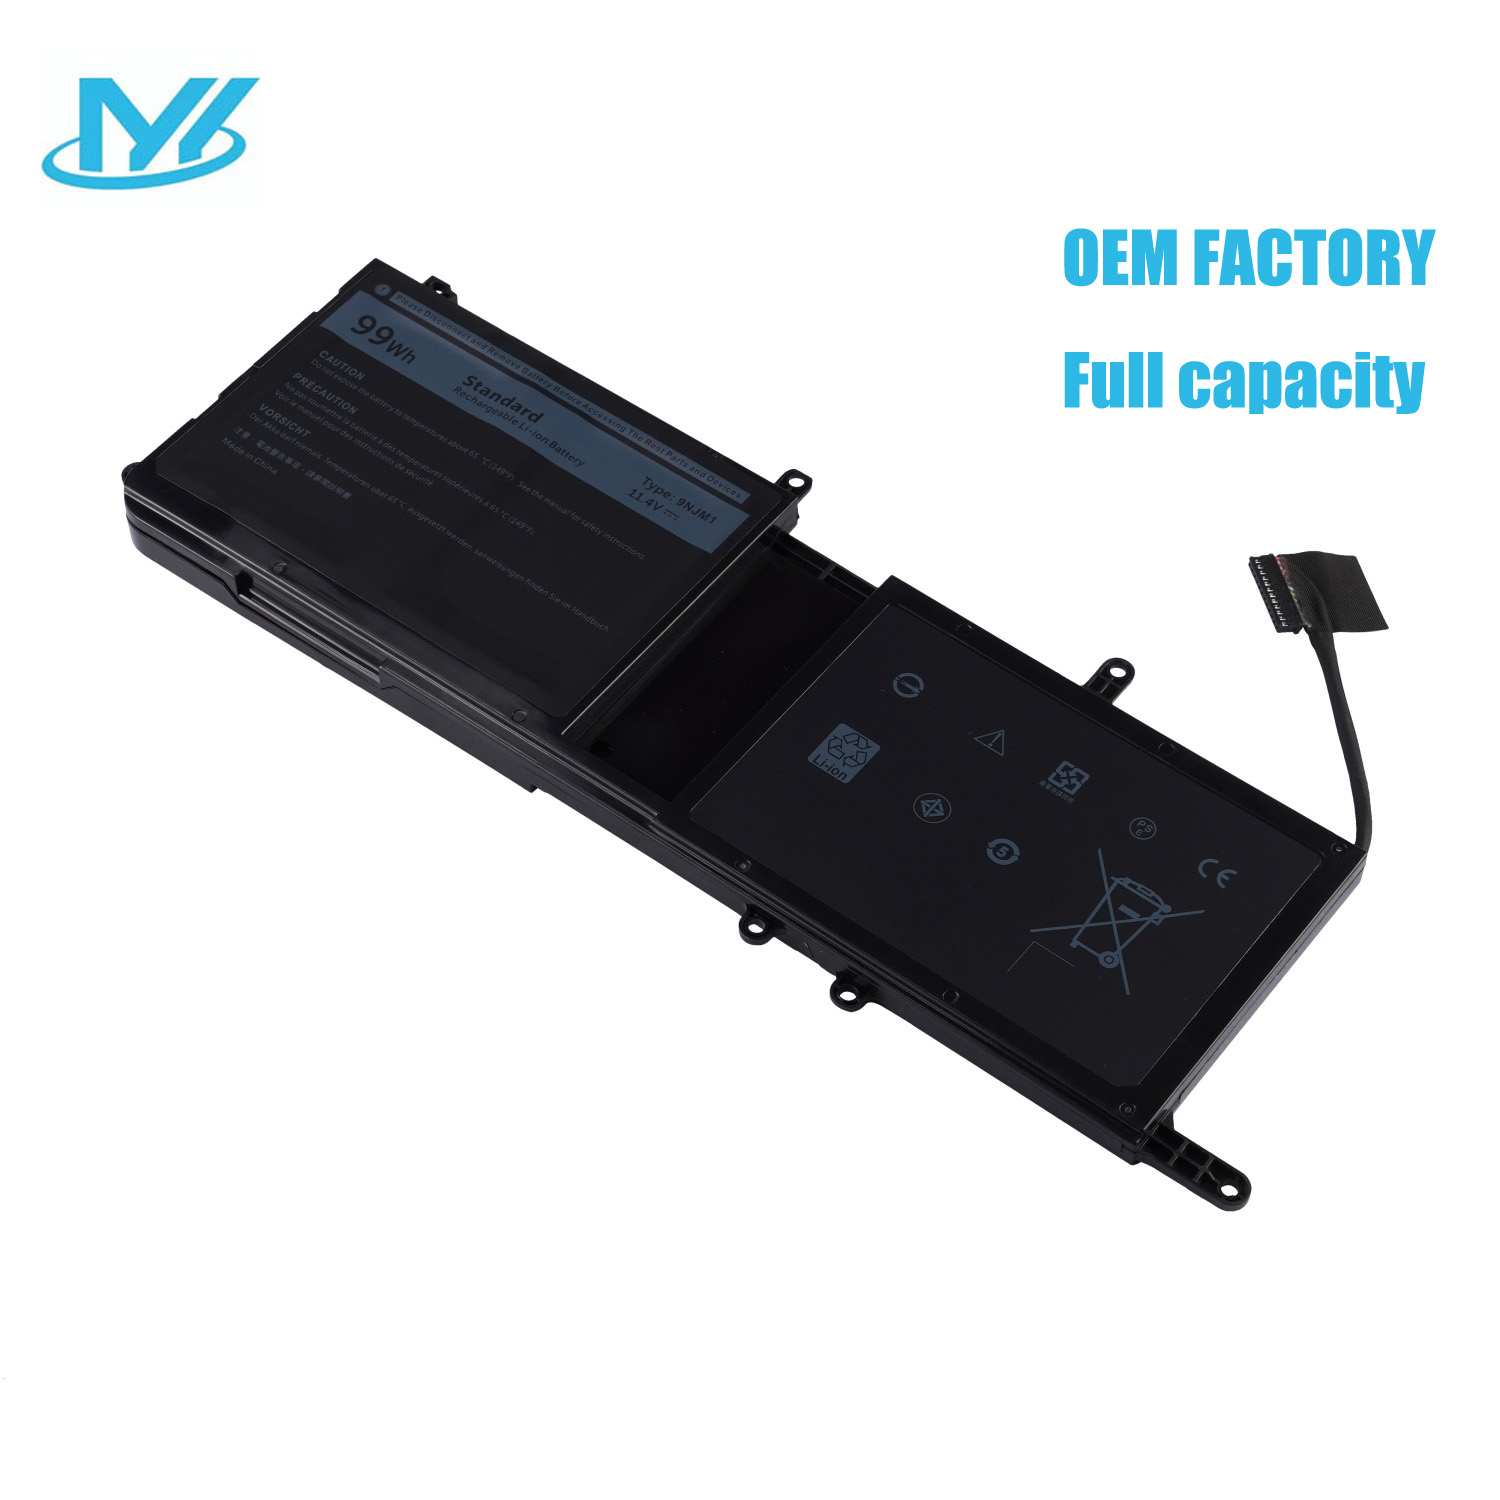 9NJM1 Laptop Battery notebook battery for Dell Alienware 15 R3 R4 17 R4 R5 P31E001 ALW17C-D1738 Notebook 0546FF 0HF250 44T2R HF250 MG2YH